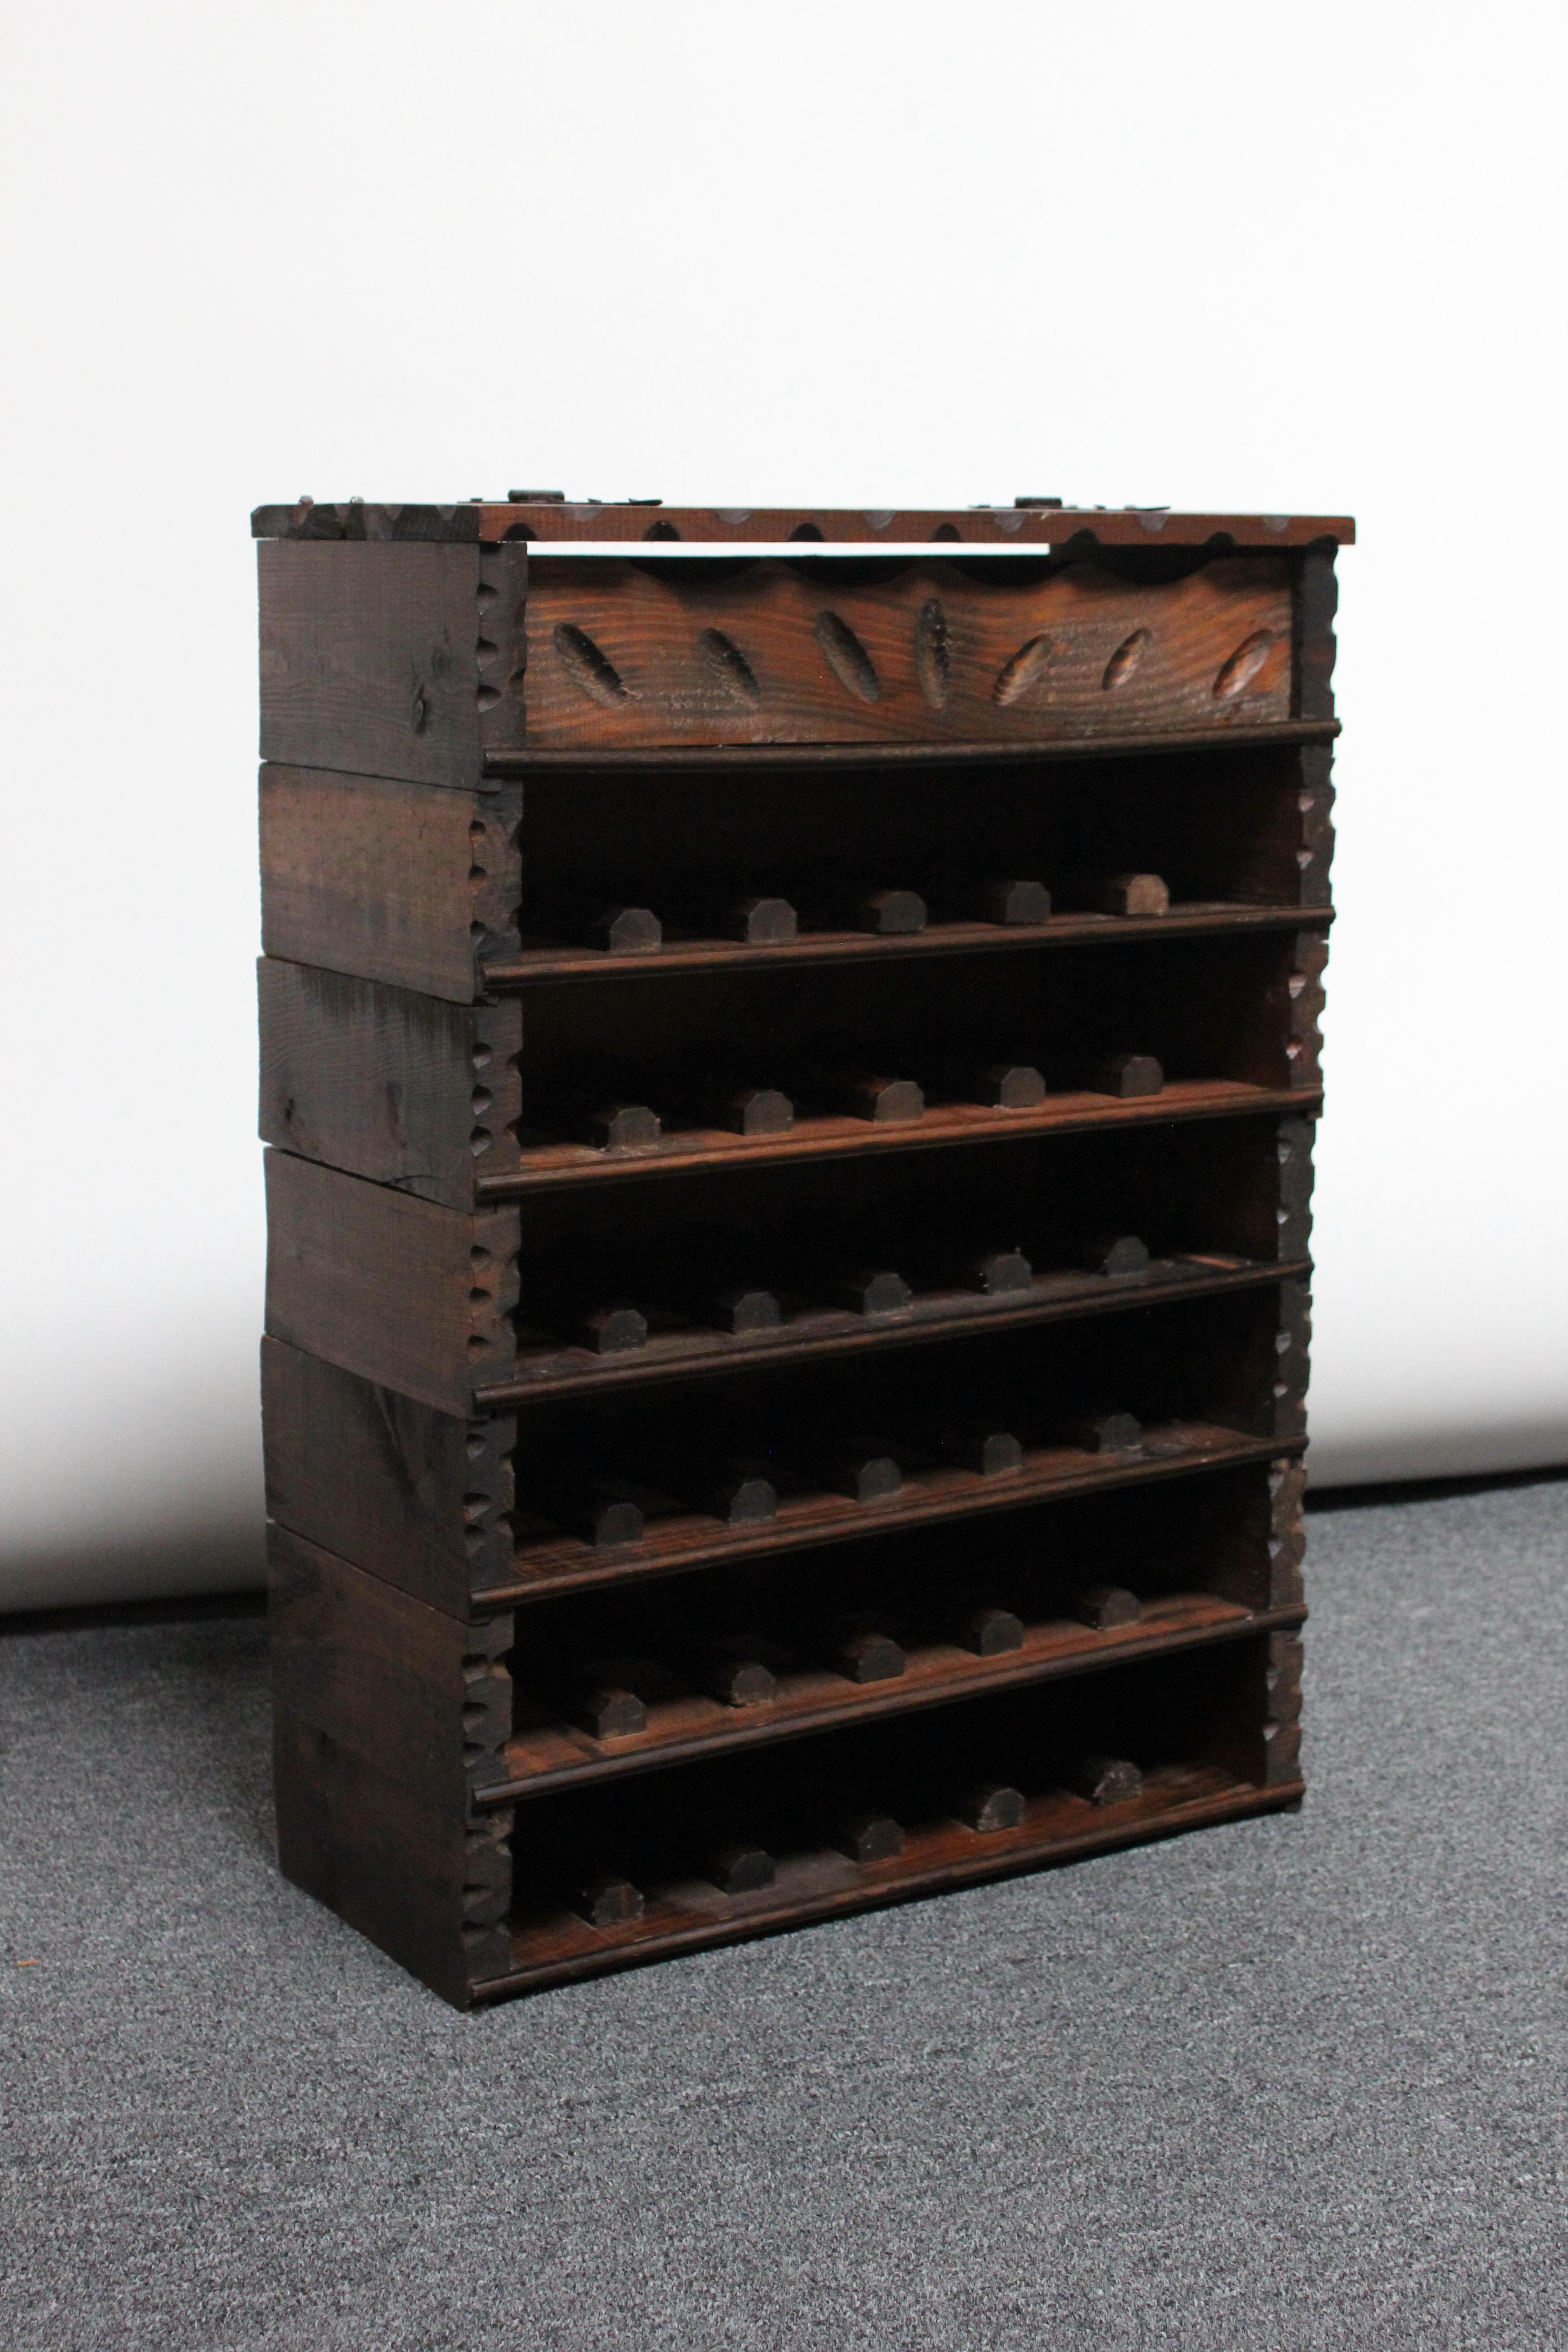 Founded in 1896, Federico Paternina established his winery on a site featuring cellars dug in the 16th century in Ollauri, Rioja Alta. 
These seven cedar racks, presumably early 20th Century promotional items, stack to form ample storage suitable